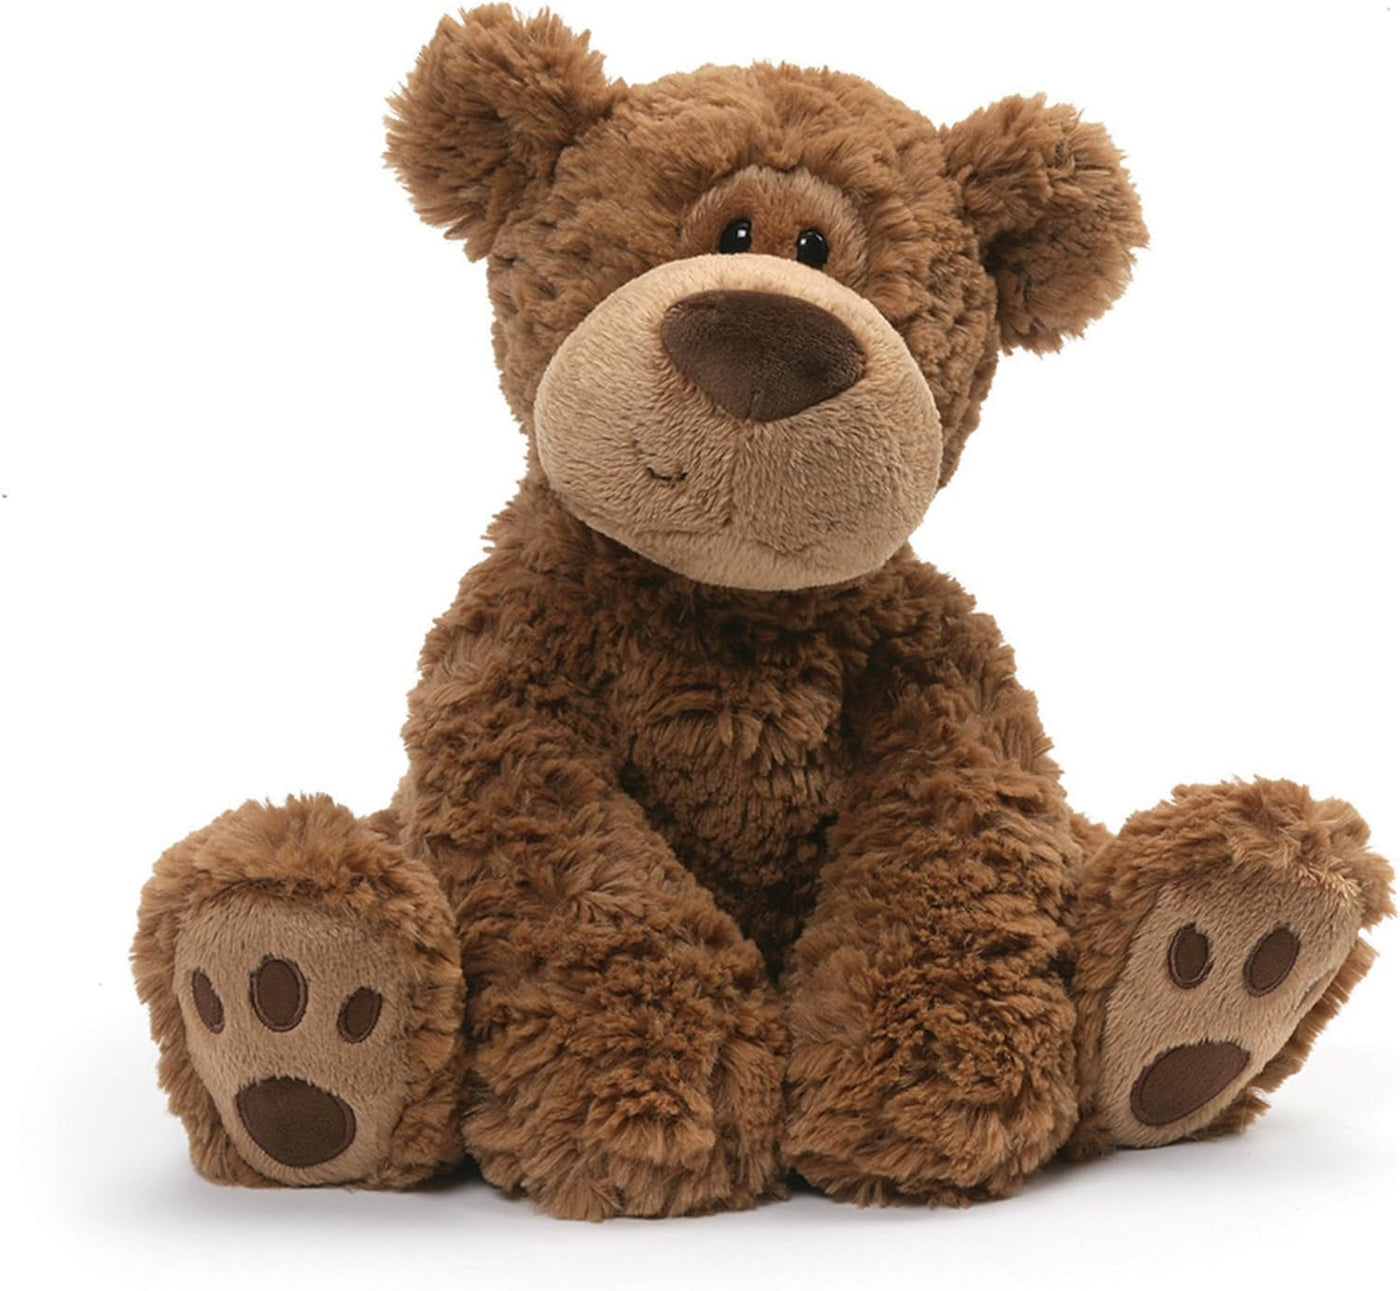 Grahm Polyester Kids Soft Toy Teddy Bear, Small, Brown